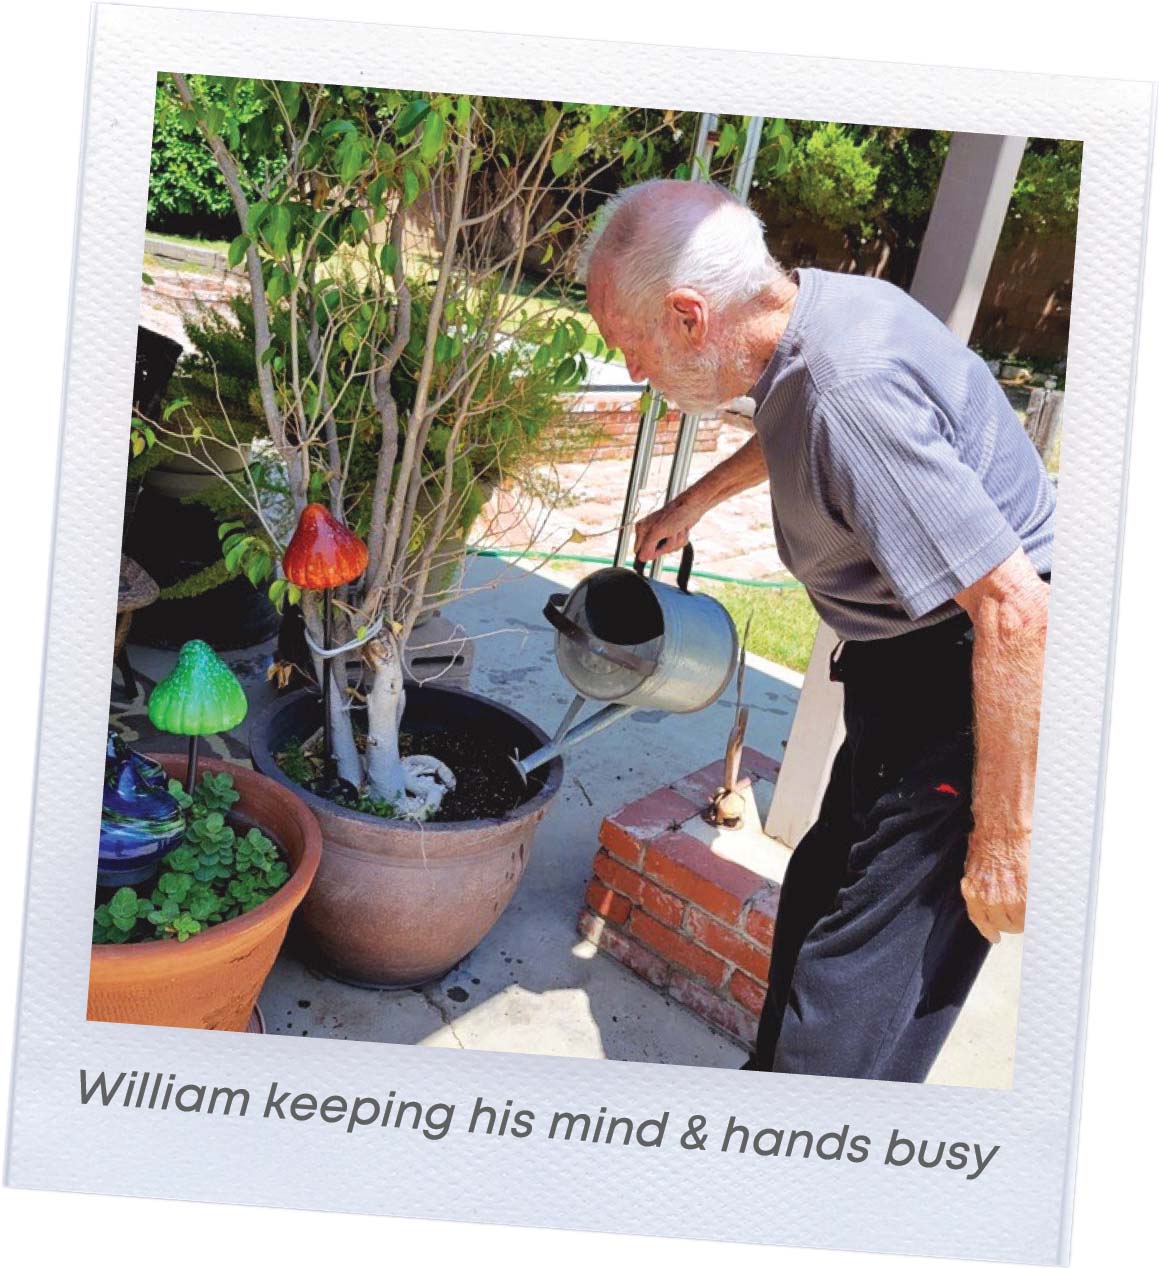 William watering his potted plants